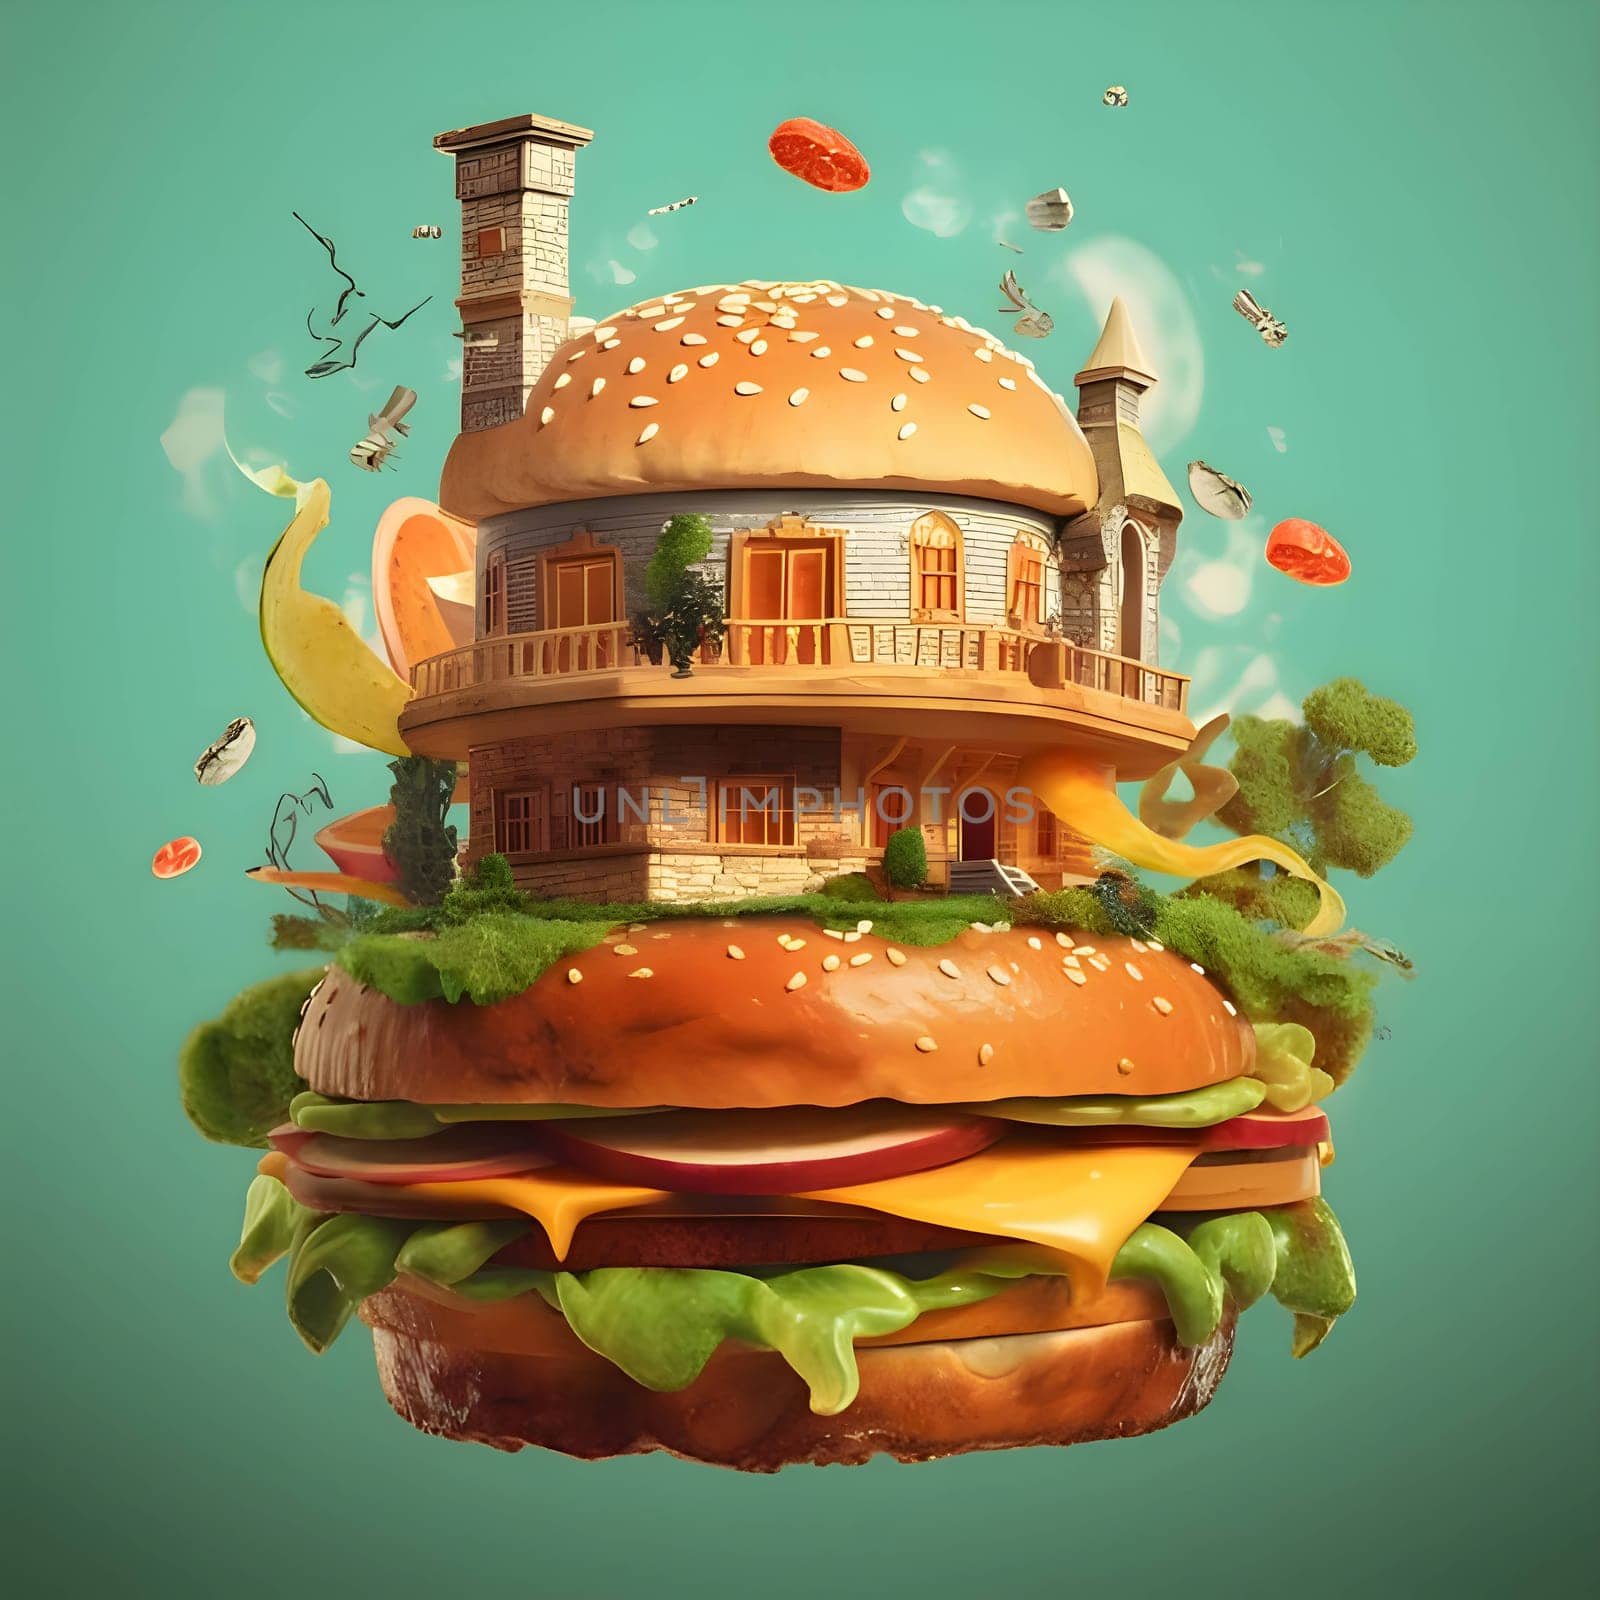 An illustration of a hamburger shaped like a house. A unique twist on a classic, showcasing creativity and imagination.